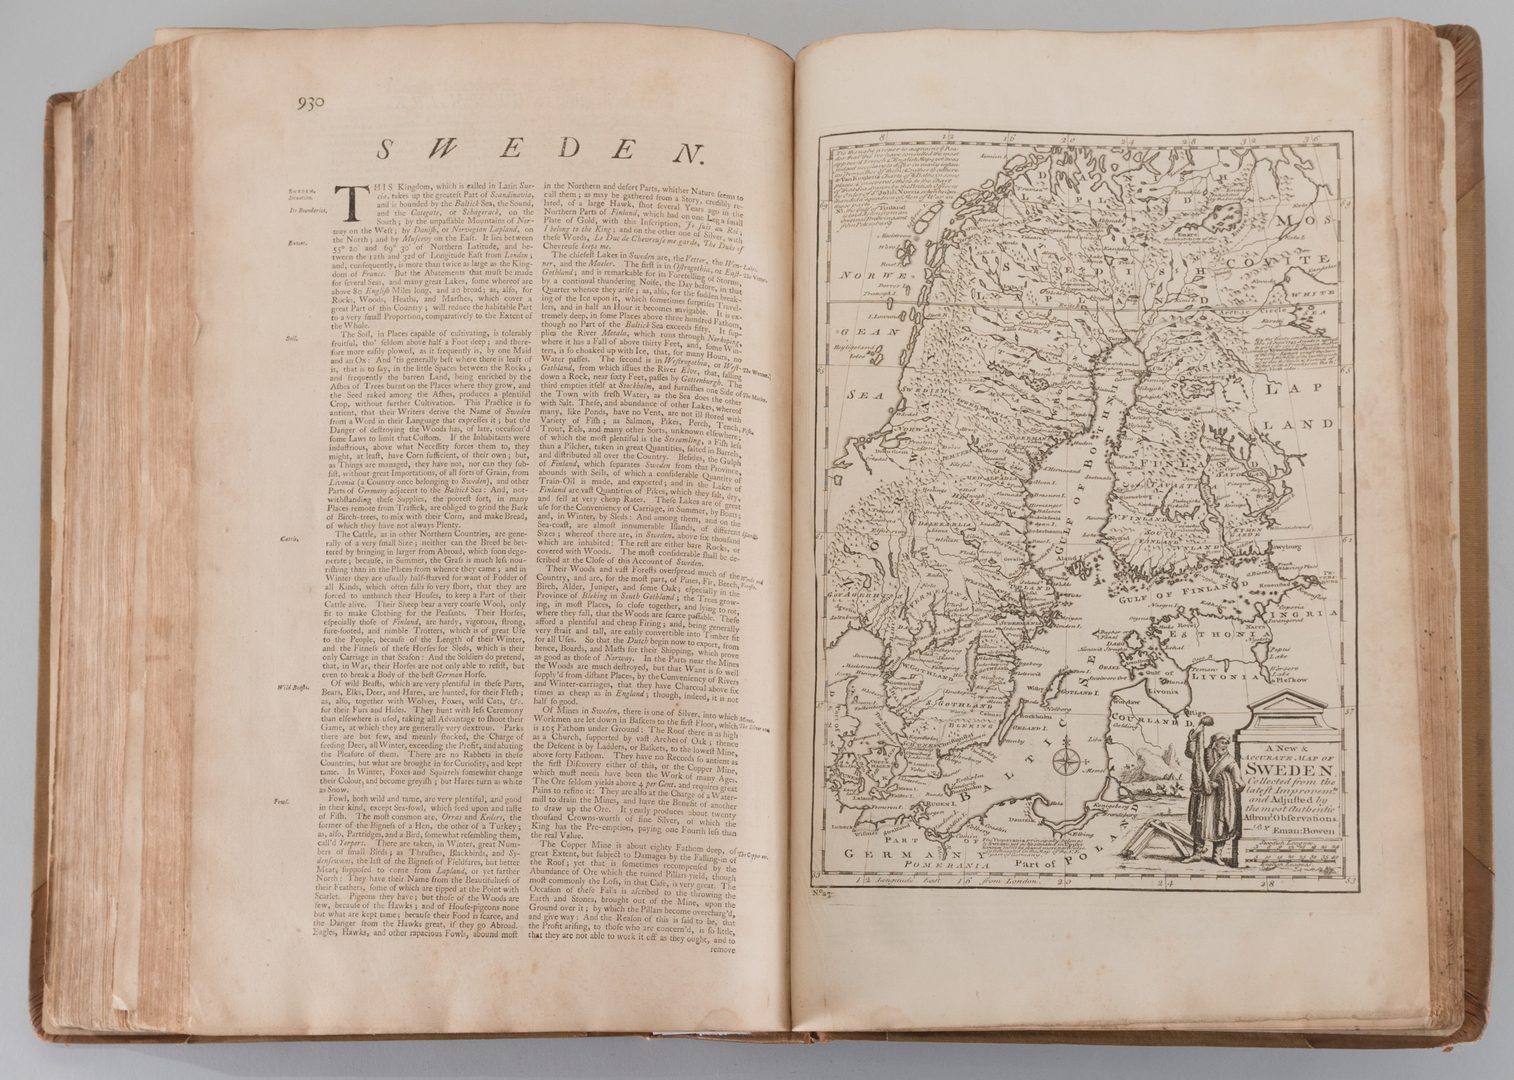 Lot 548:  A Complete System of Geography, Vol. I Bowen 1747